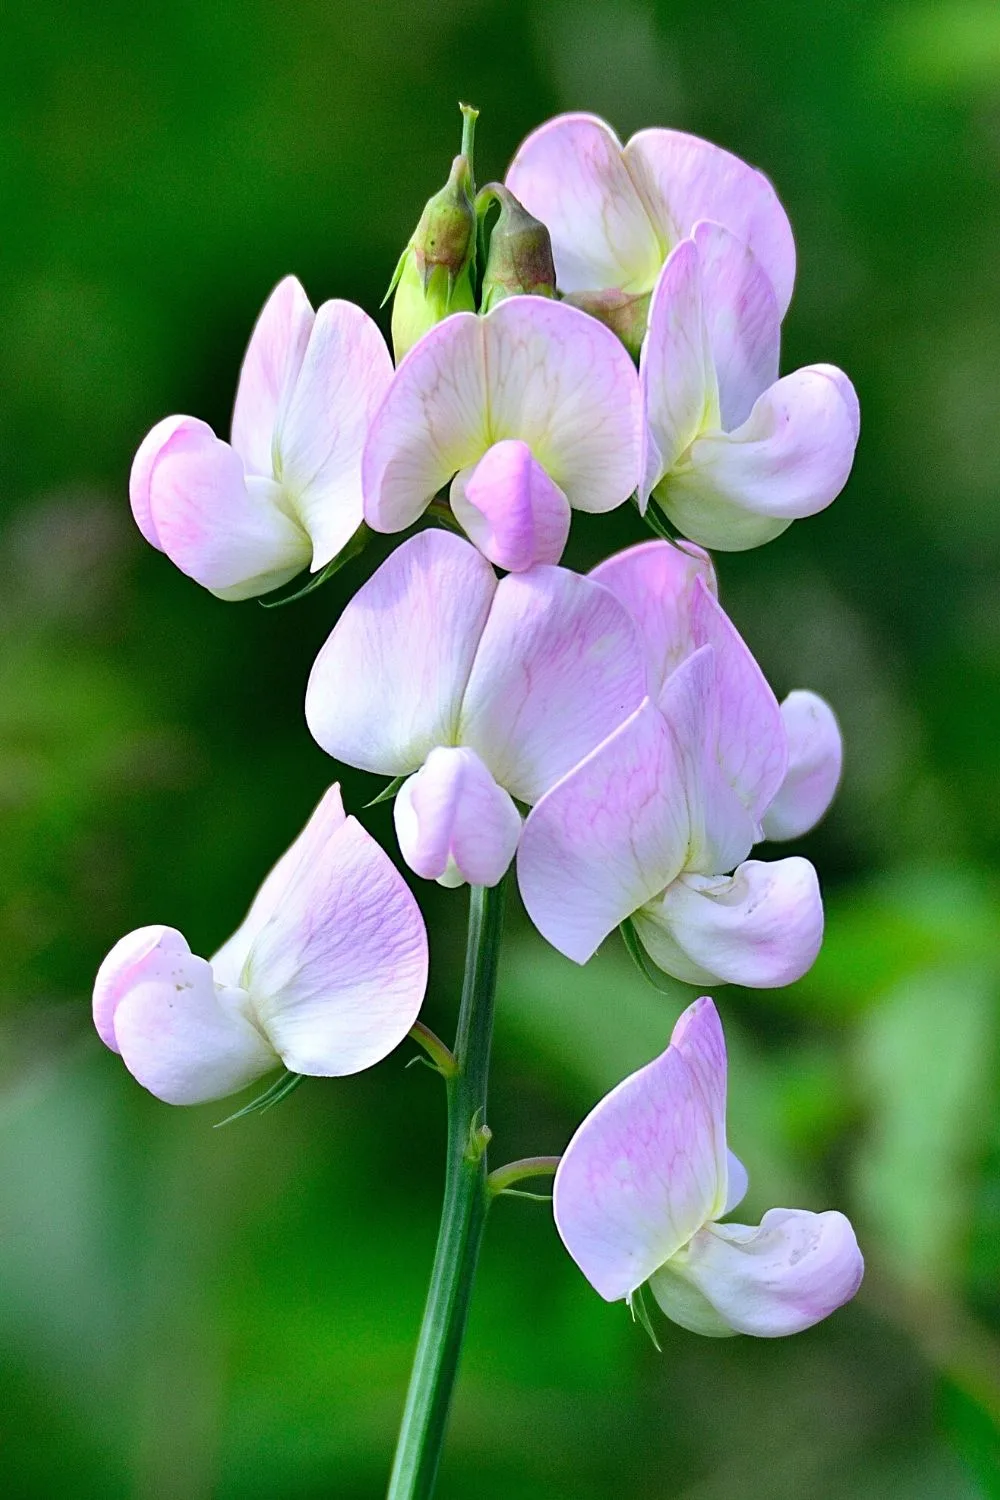 Lathyrus Latifolius can survive without a single ray of sunlight in the north-facing side of the house